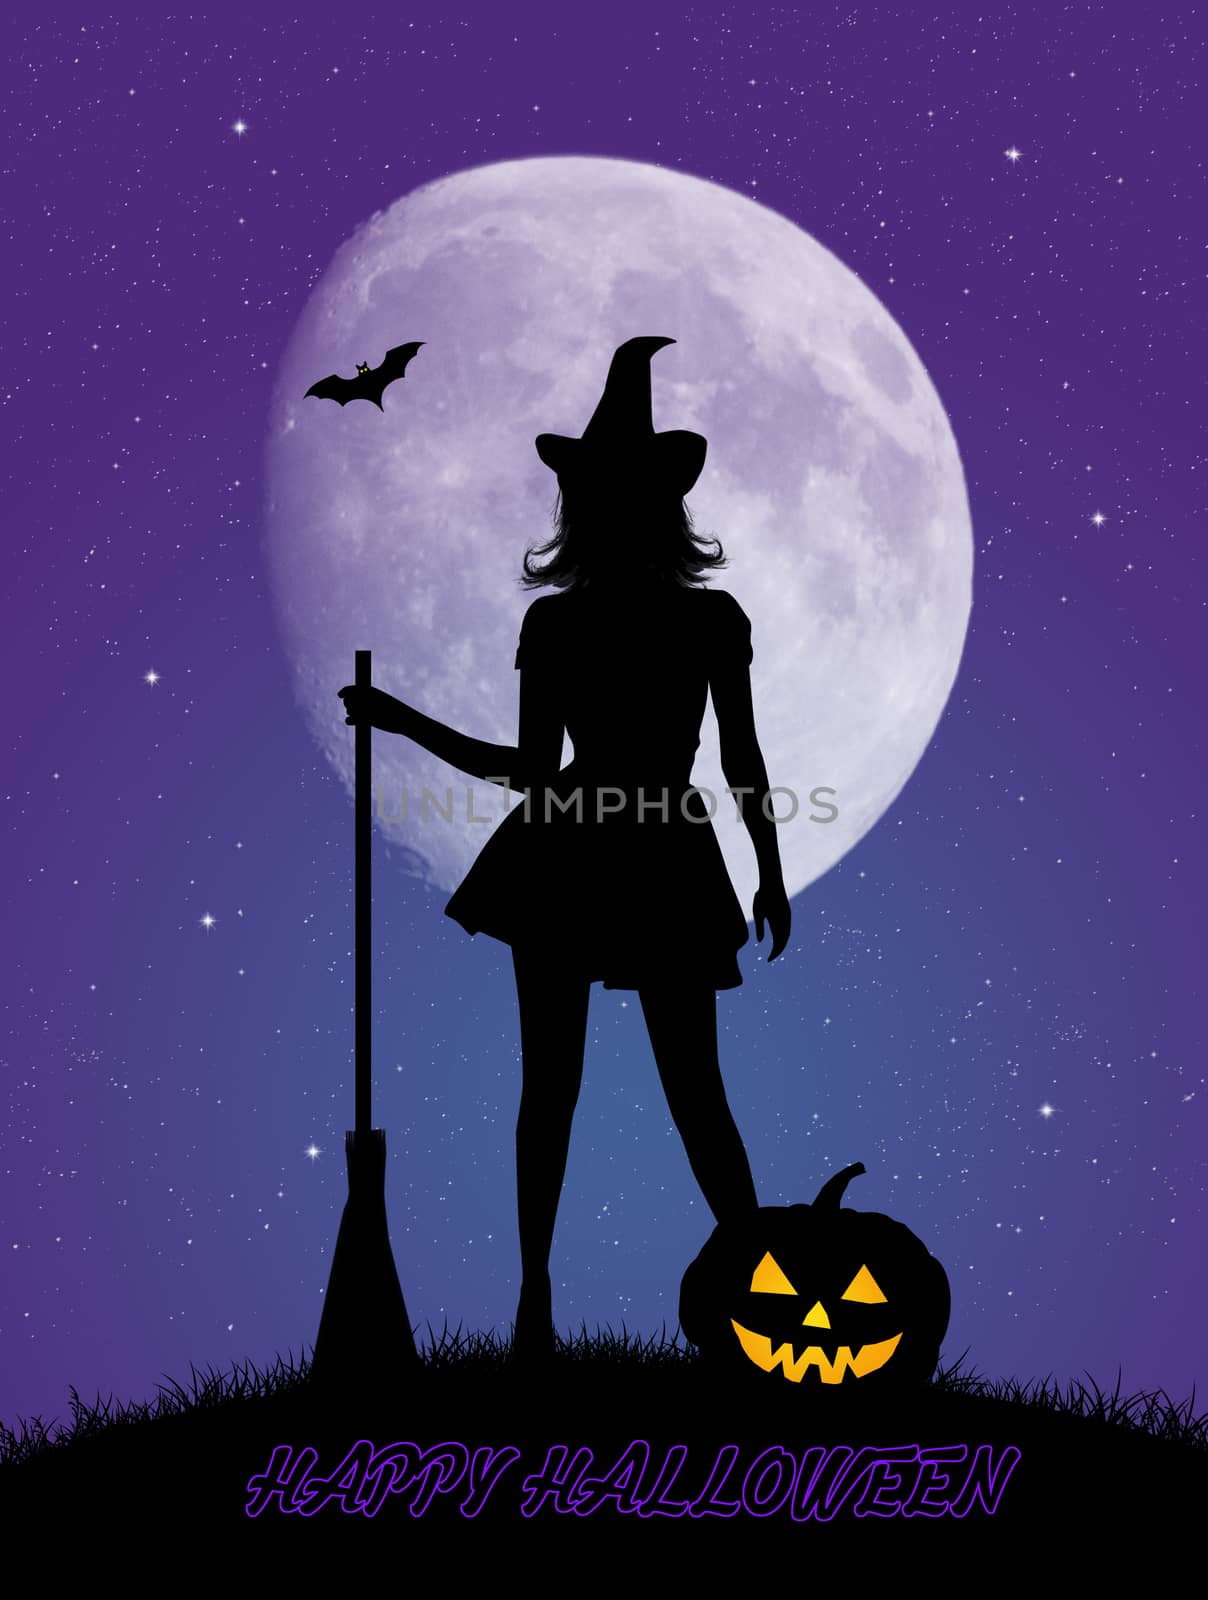 illustration of Halloween postcard with witch in the moonlight